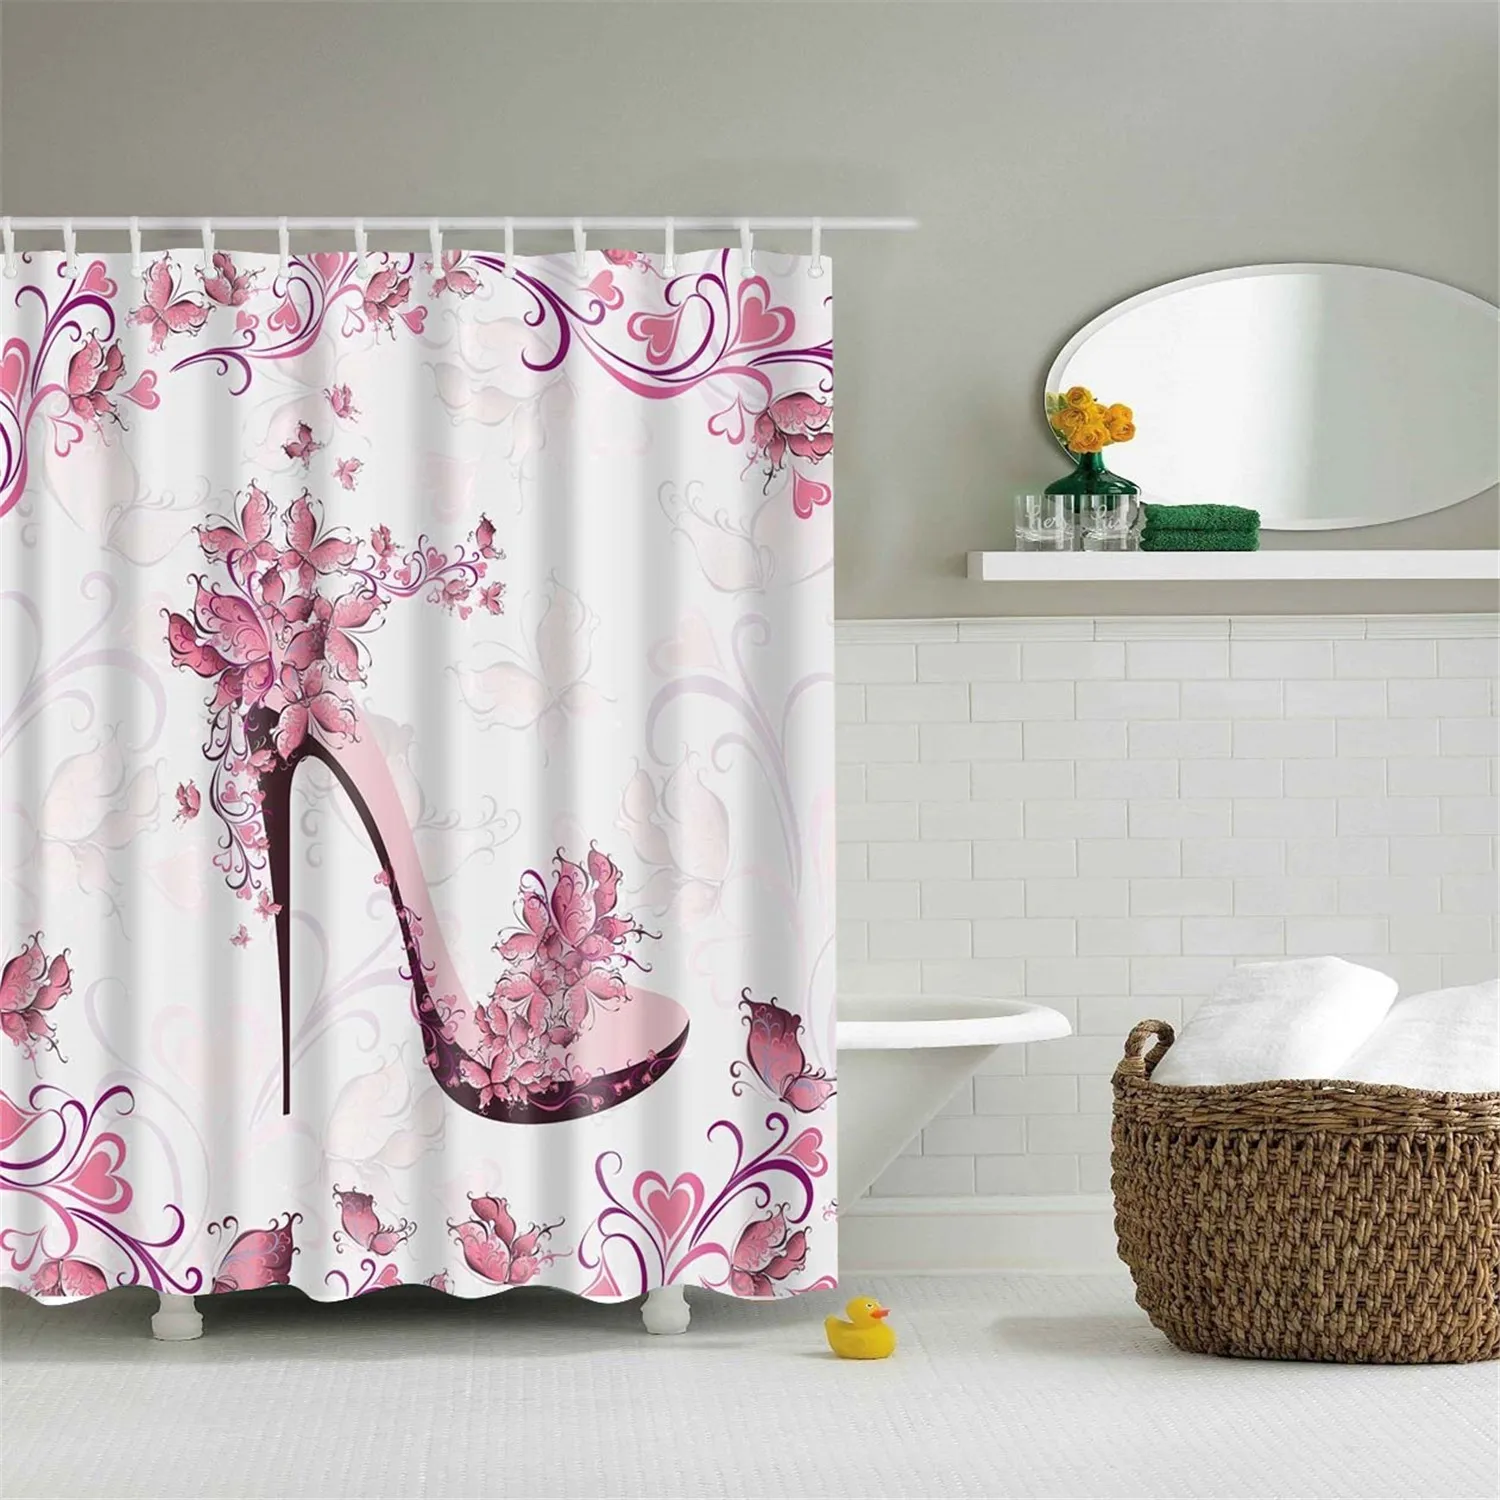 Washable Cute Sweet print Shower curtain waterproof 3D polyester fabric for bathroom curtain large 180x200cm cortinas